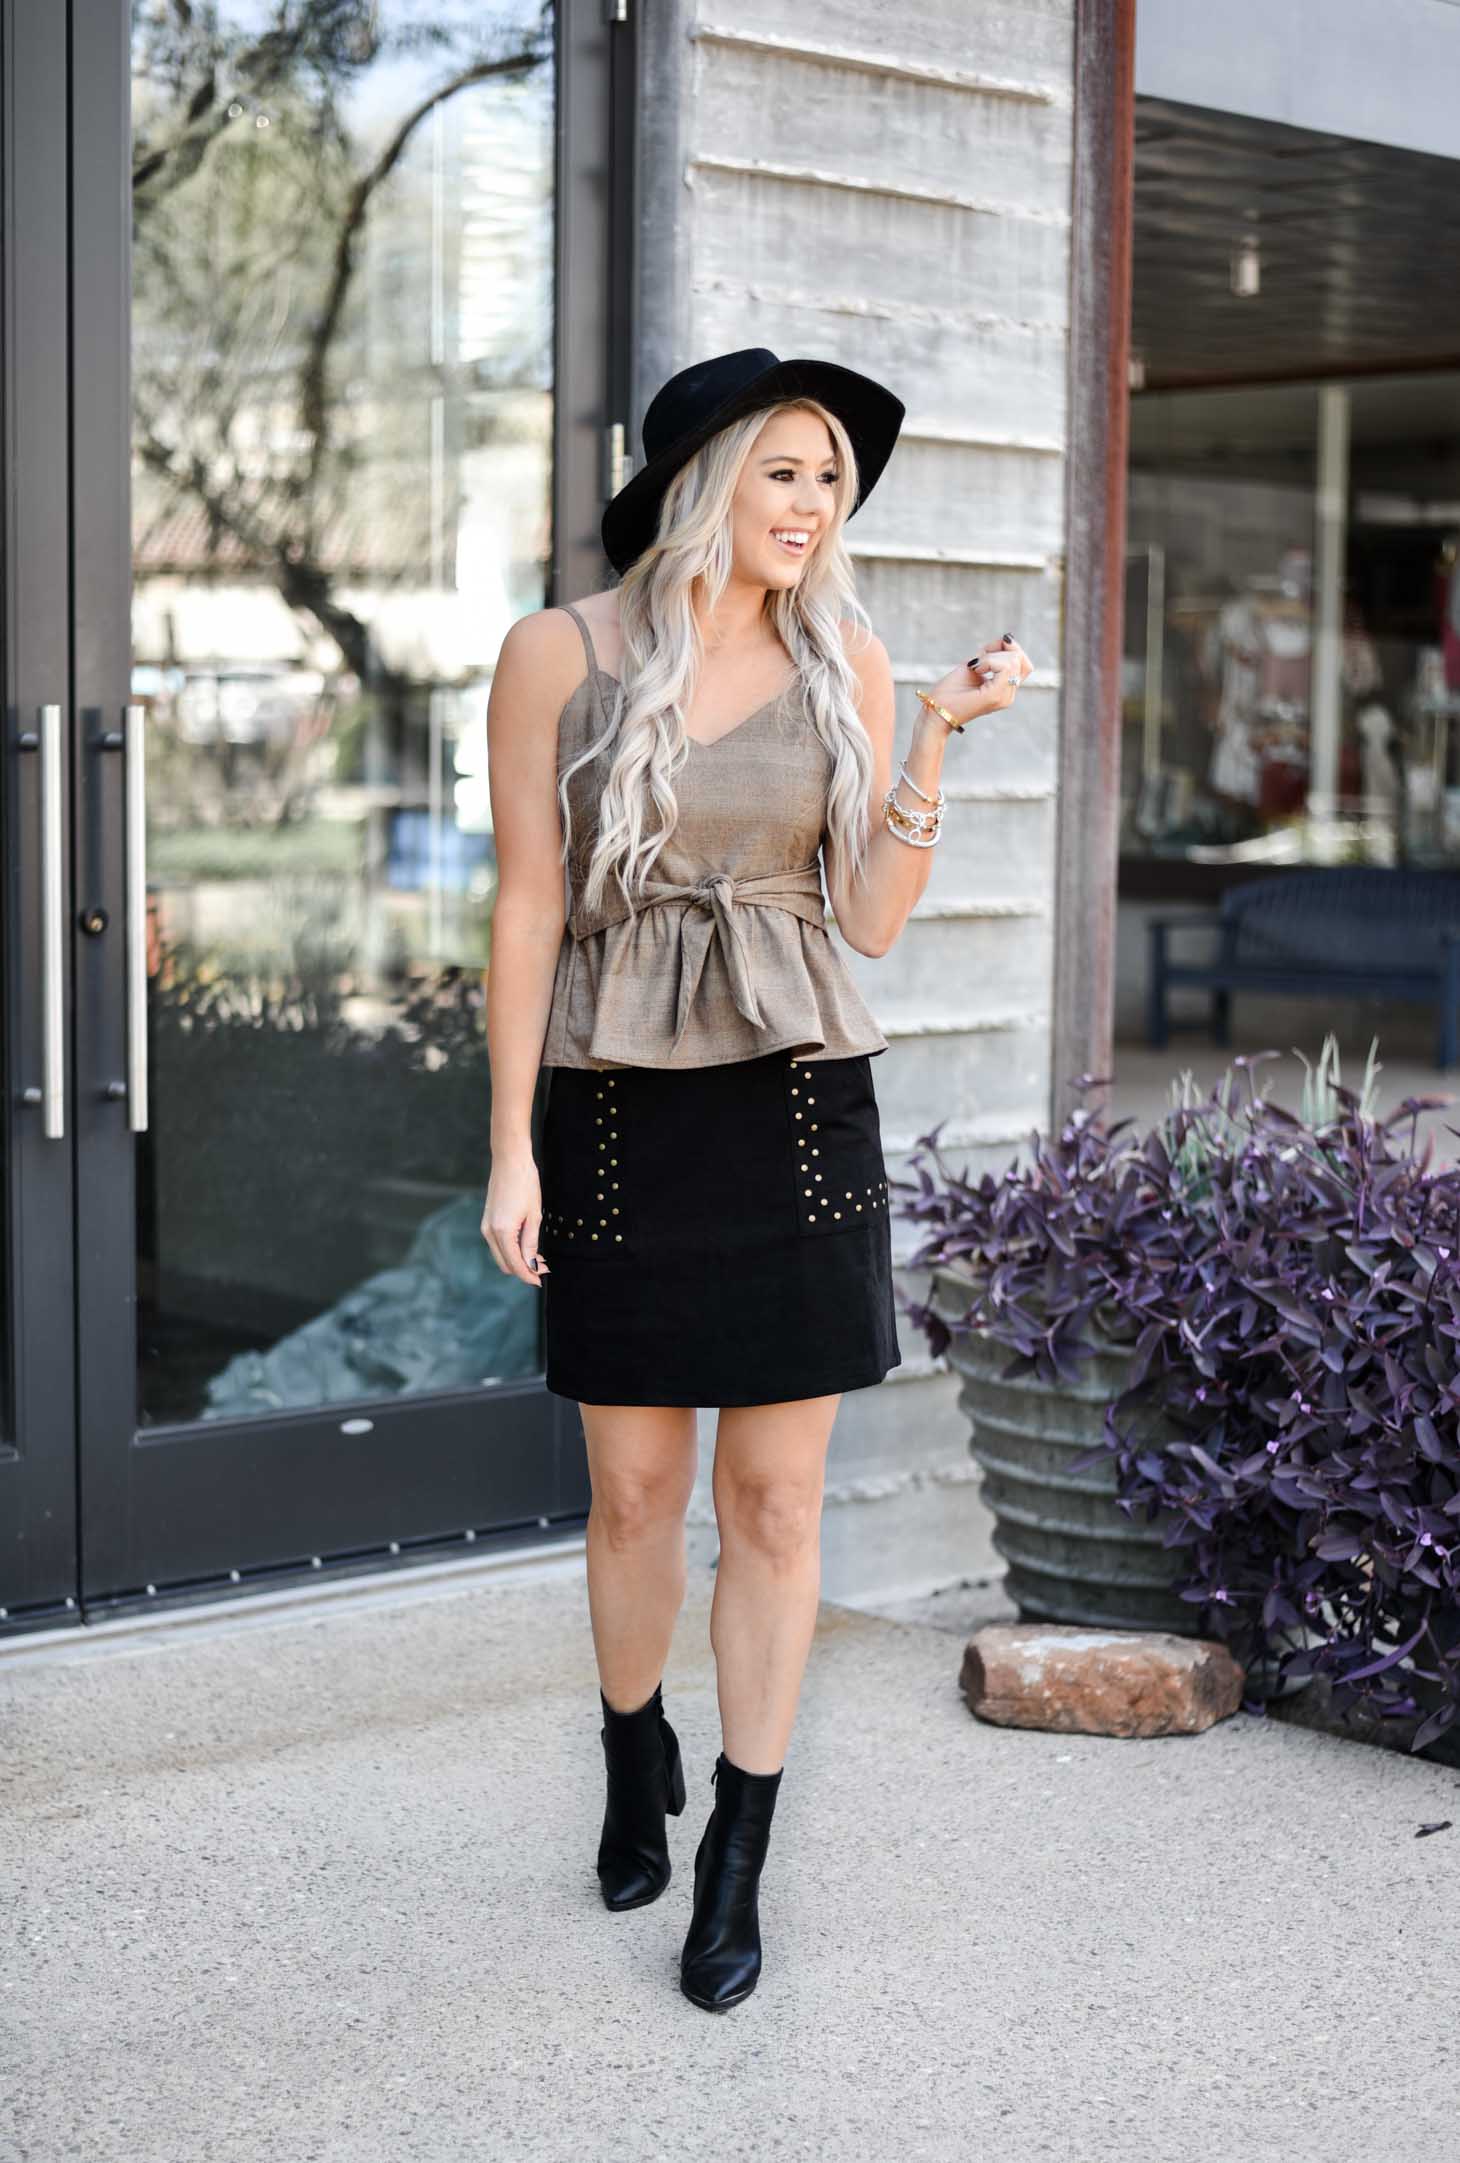 Erin Elizabeth of Wink and a Twirl shares a cute skirt and boot look from Shop Sugar Lips